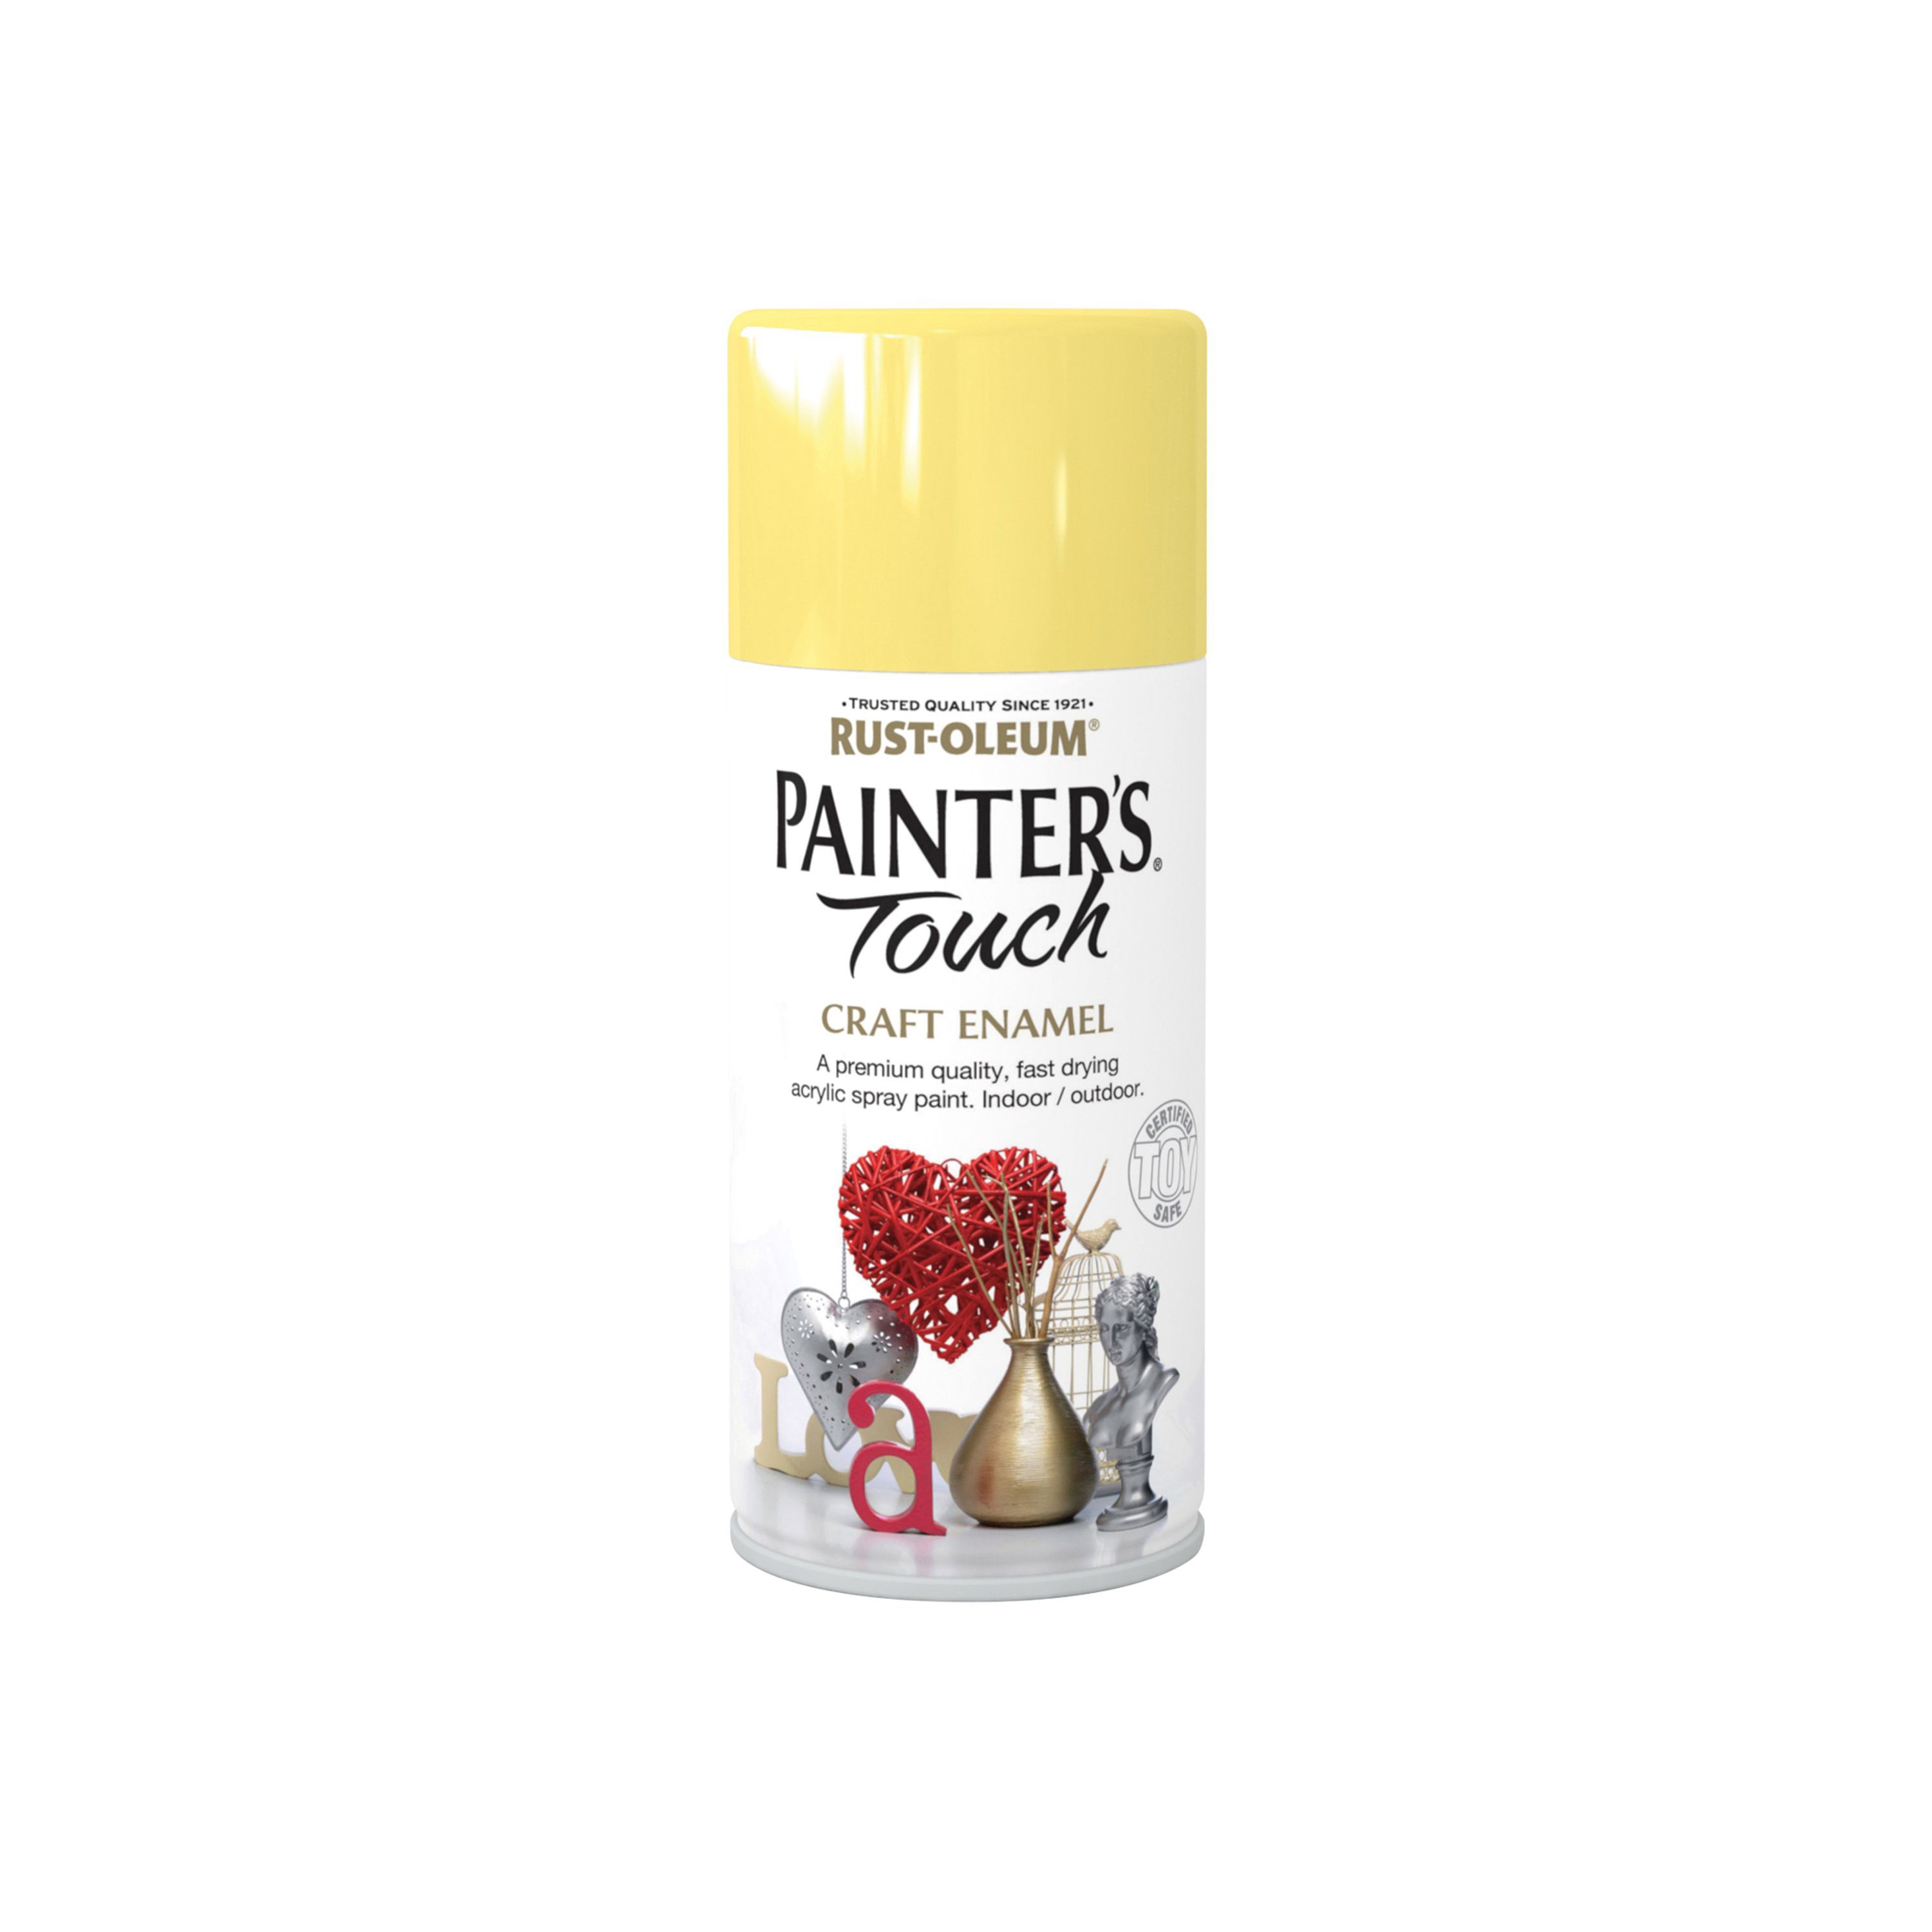 Rust-Oleum Painter's touch Buttercup yellow Gloss Multi-surface Decorative spray paint, 150ml